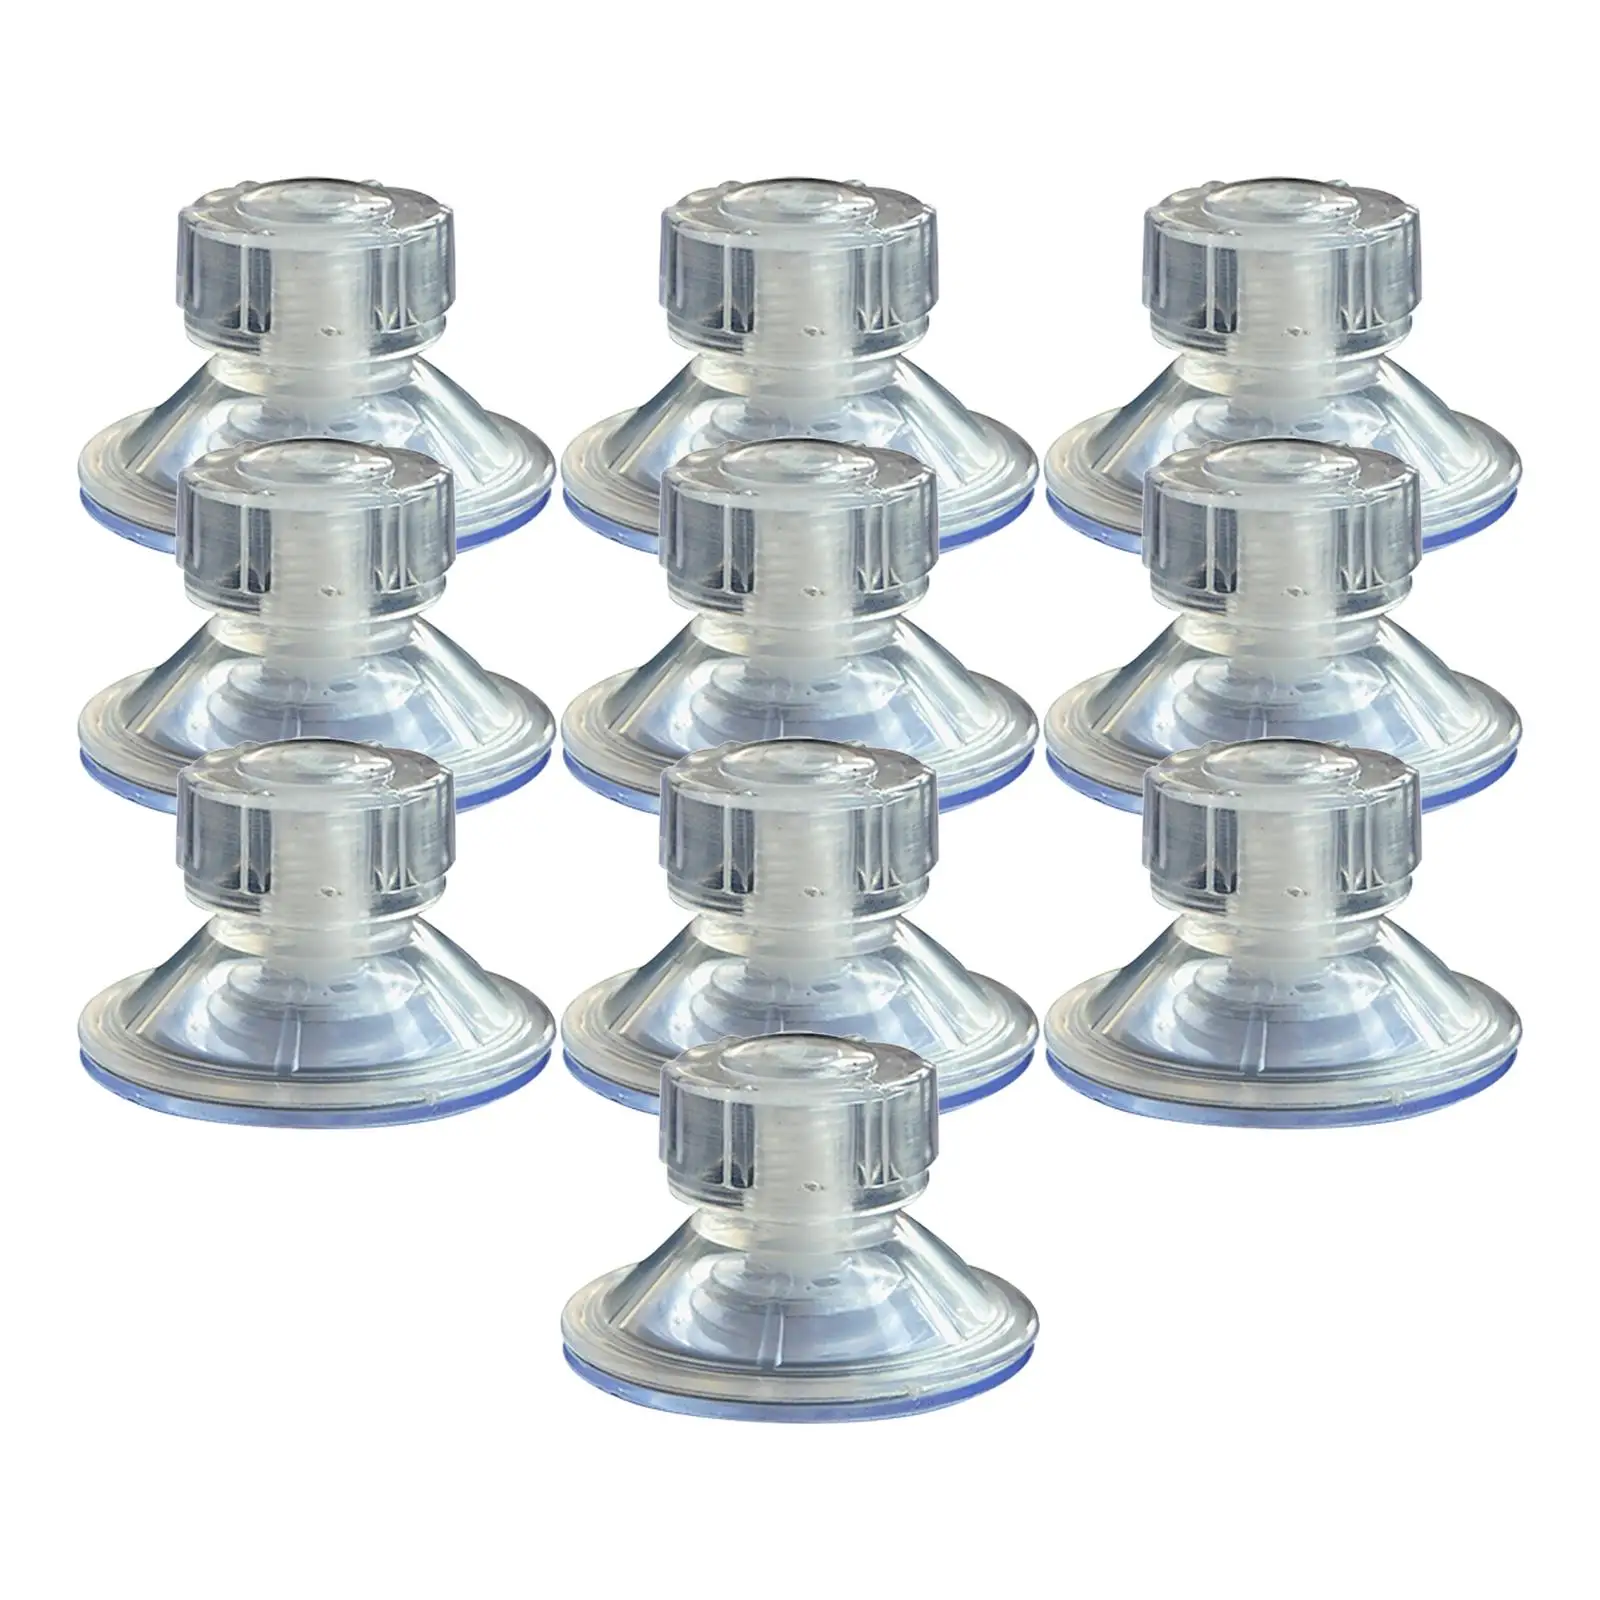 10 Pieces Car Awning Suction Cup Anchor Fixing Pads Limpets for